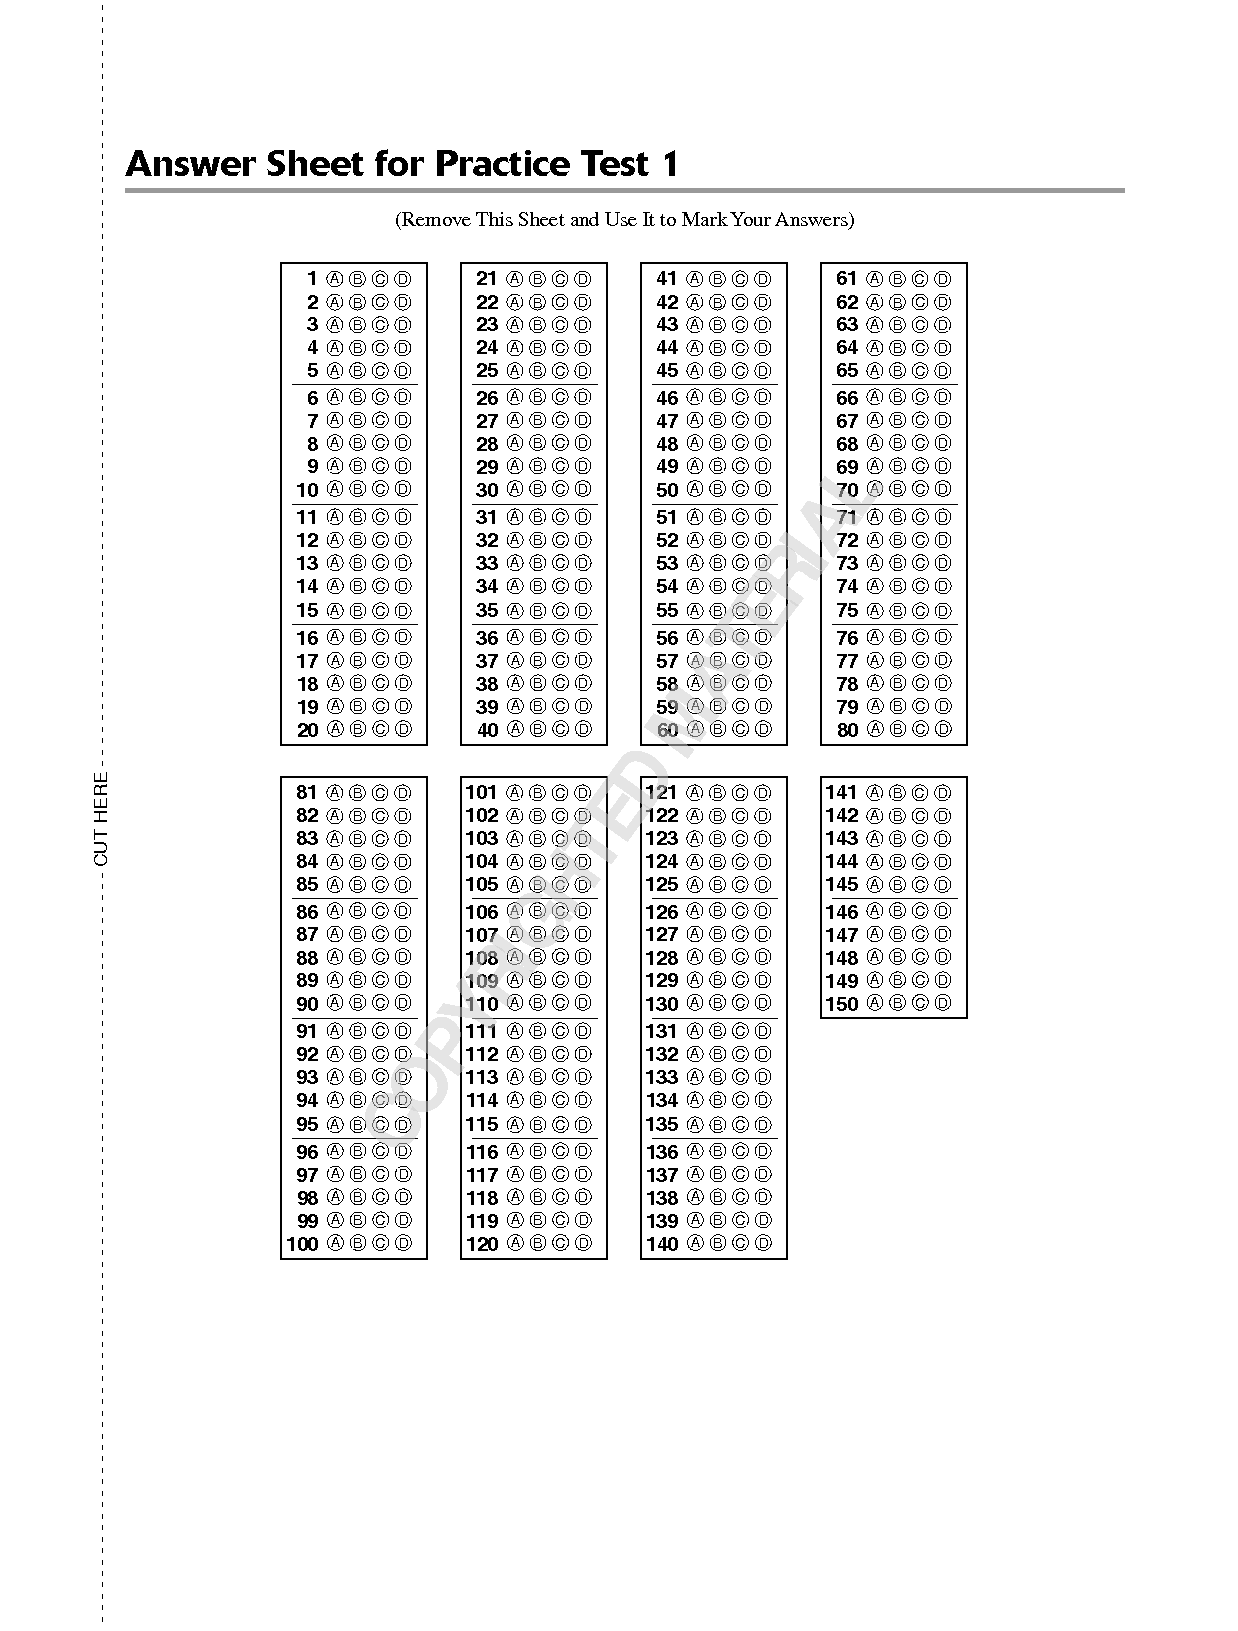 sat-practice-worksheets-with-answers